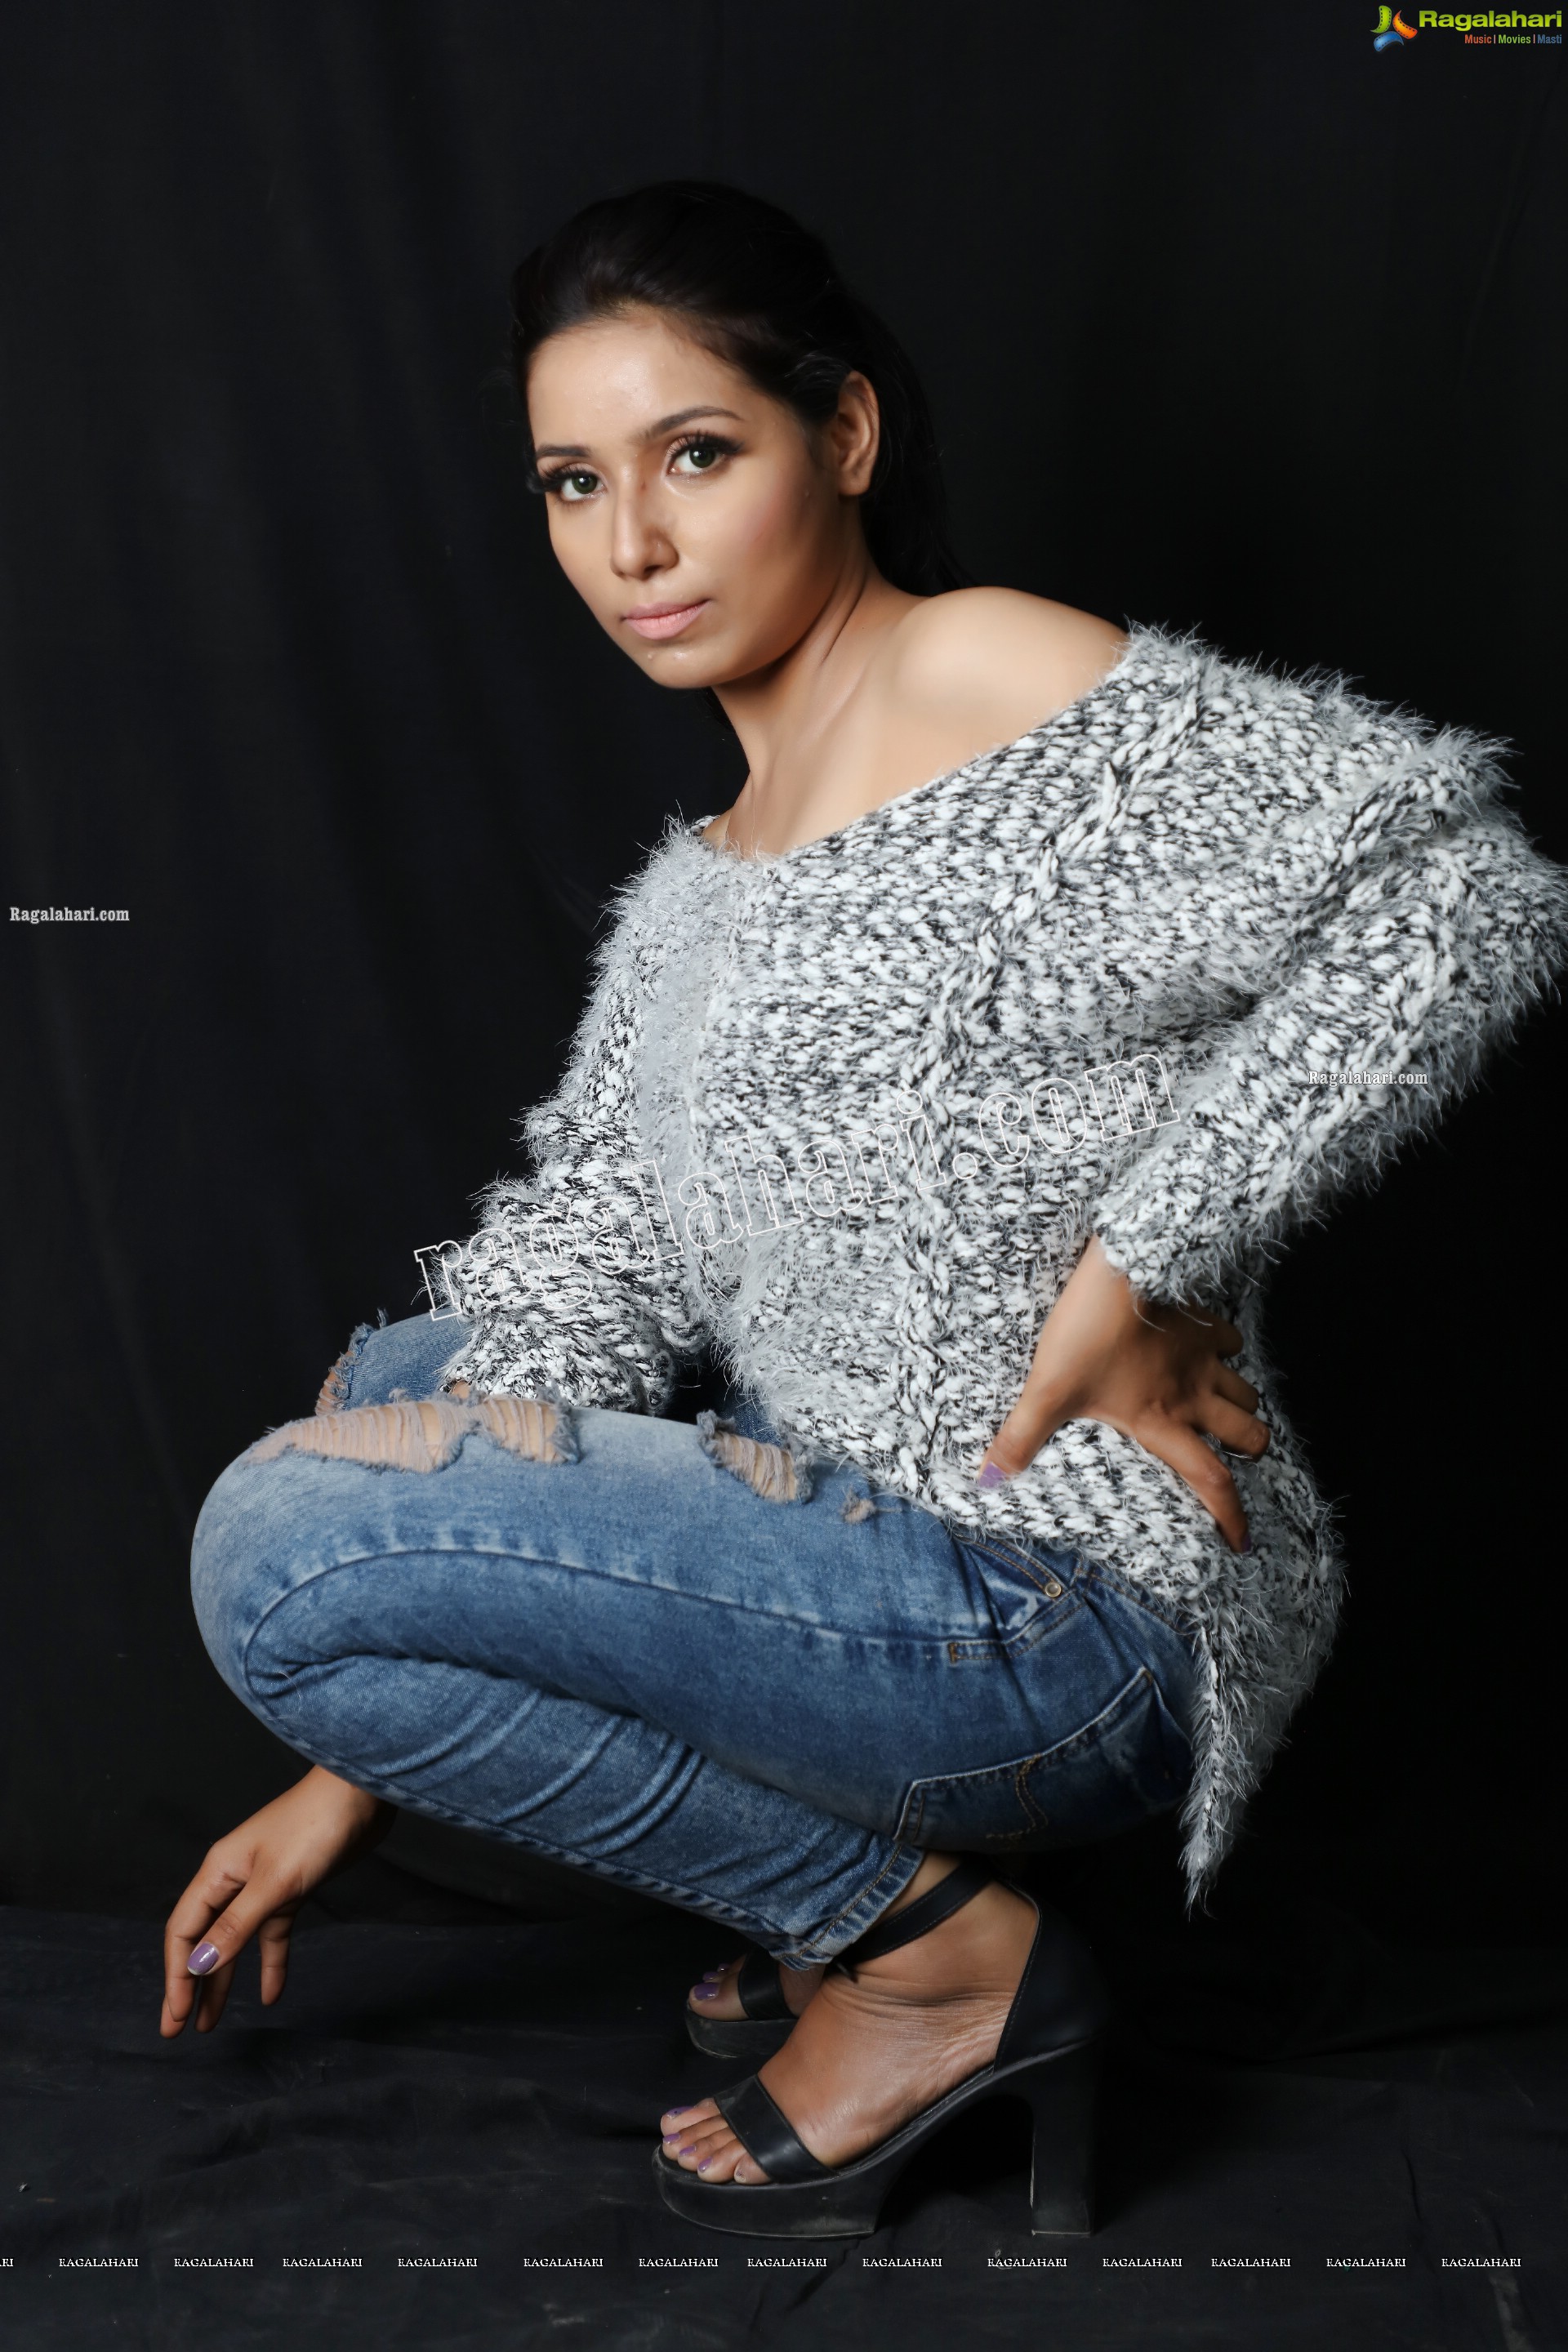 Neha Goswami in Ripped Jeans and fuzzy Sweatshirt, Exclusive Photo Shoot